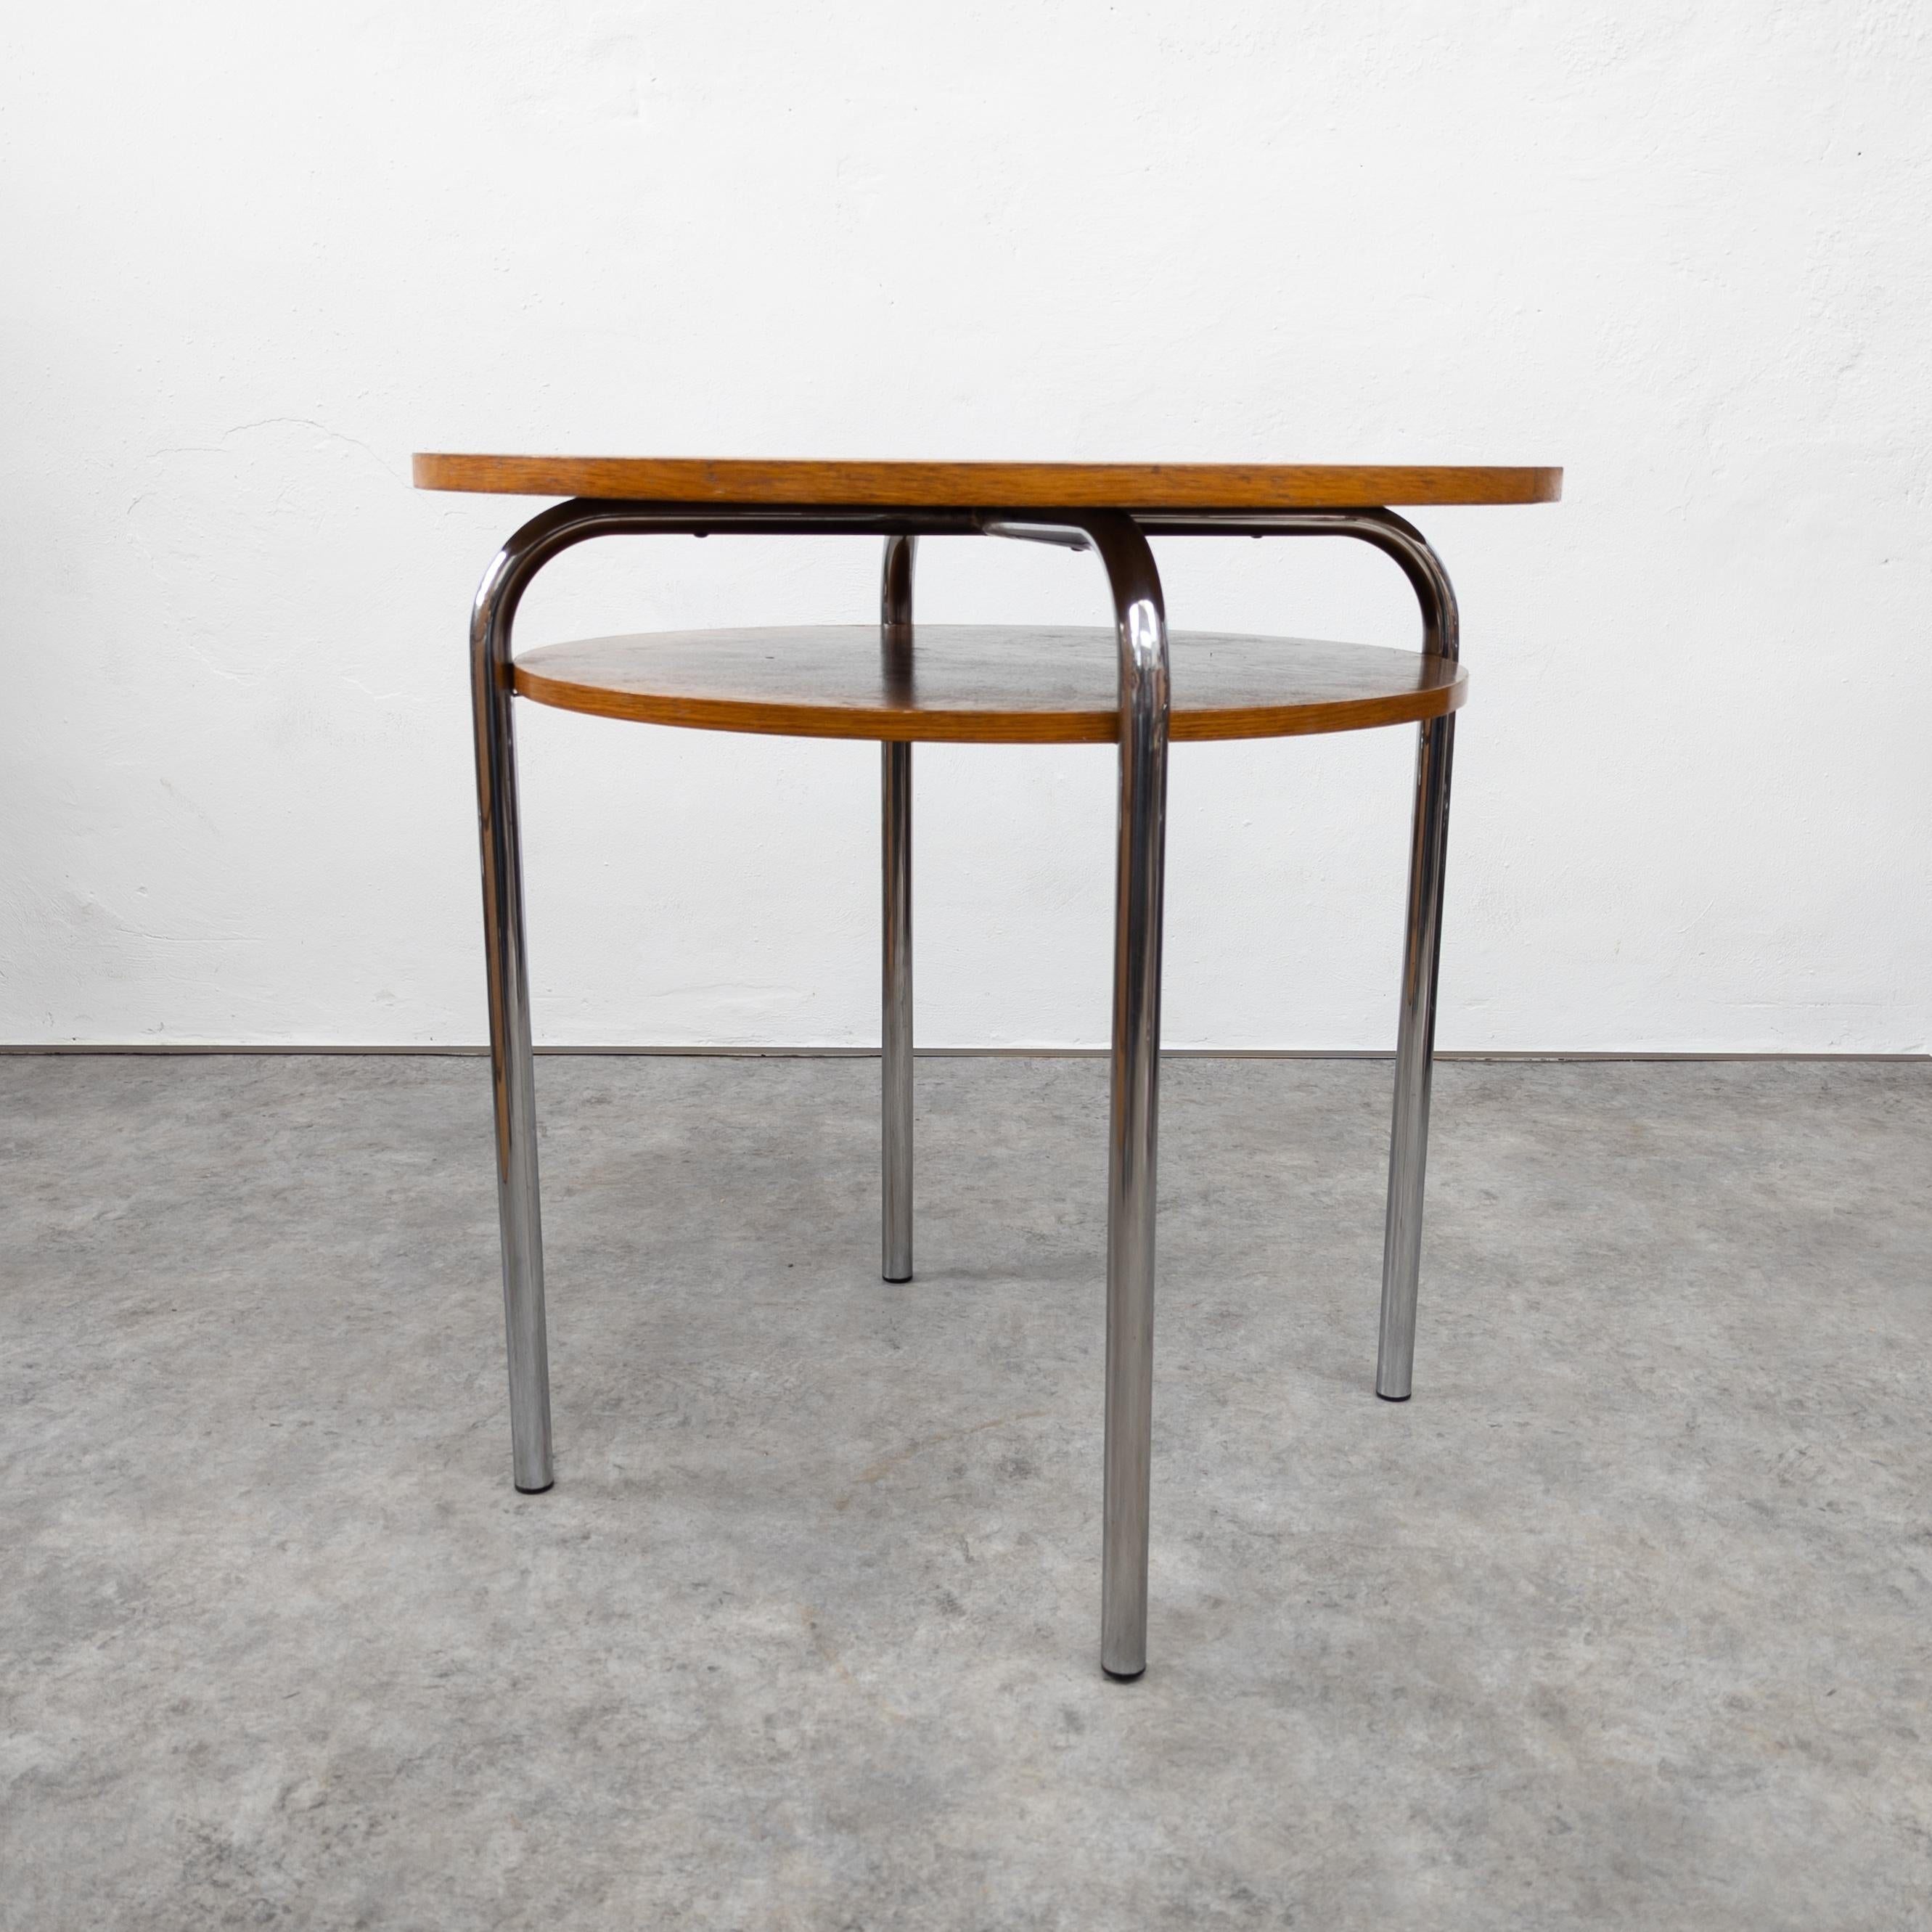 Variation of Ludwig Mies van der Rohe Thonet MR515 table. Manufactured by Vichr and Co., former Czechoslovakia in 1930s. In good original condition with some traces of wear and age on the wooden top, chrome very well preserved. Height 77 cm,